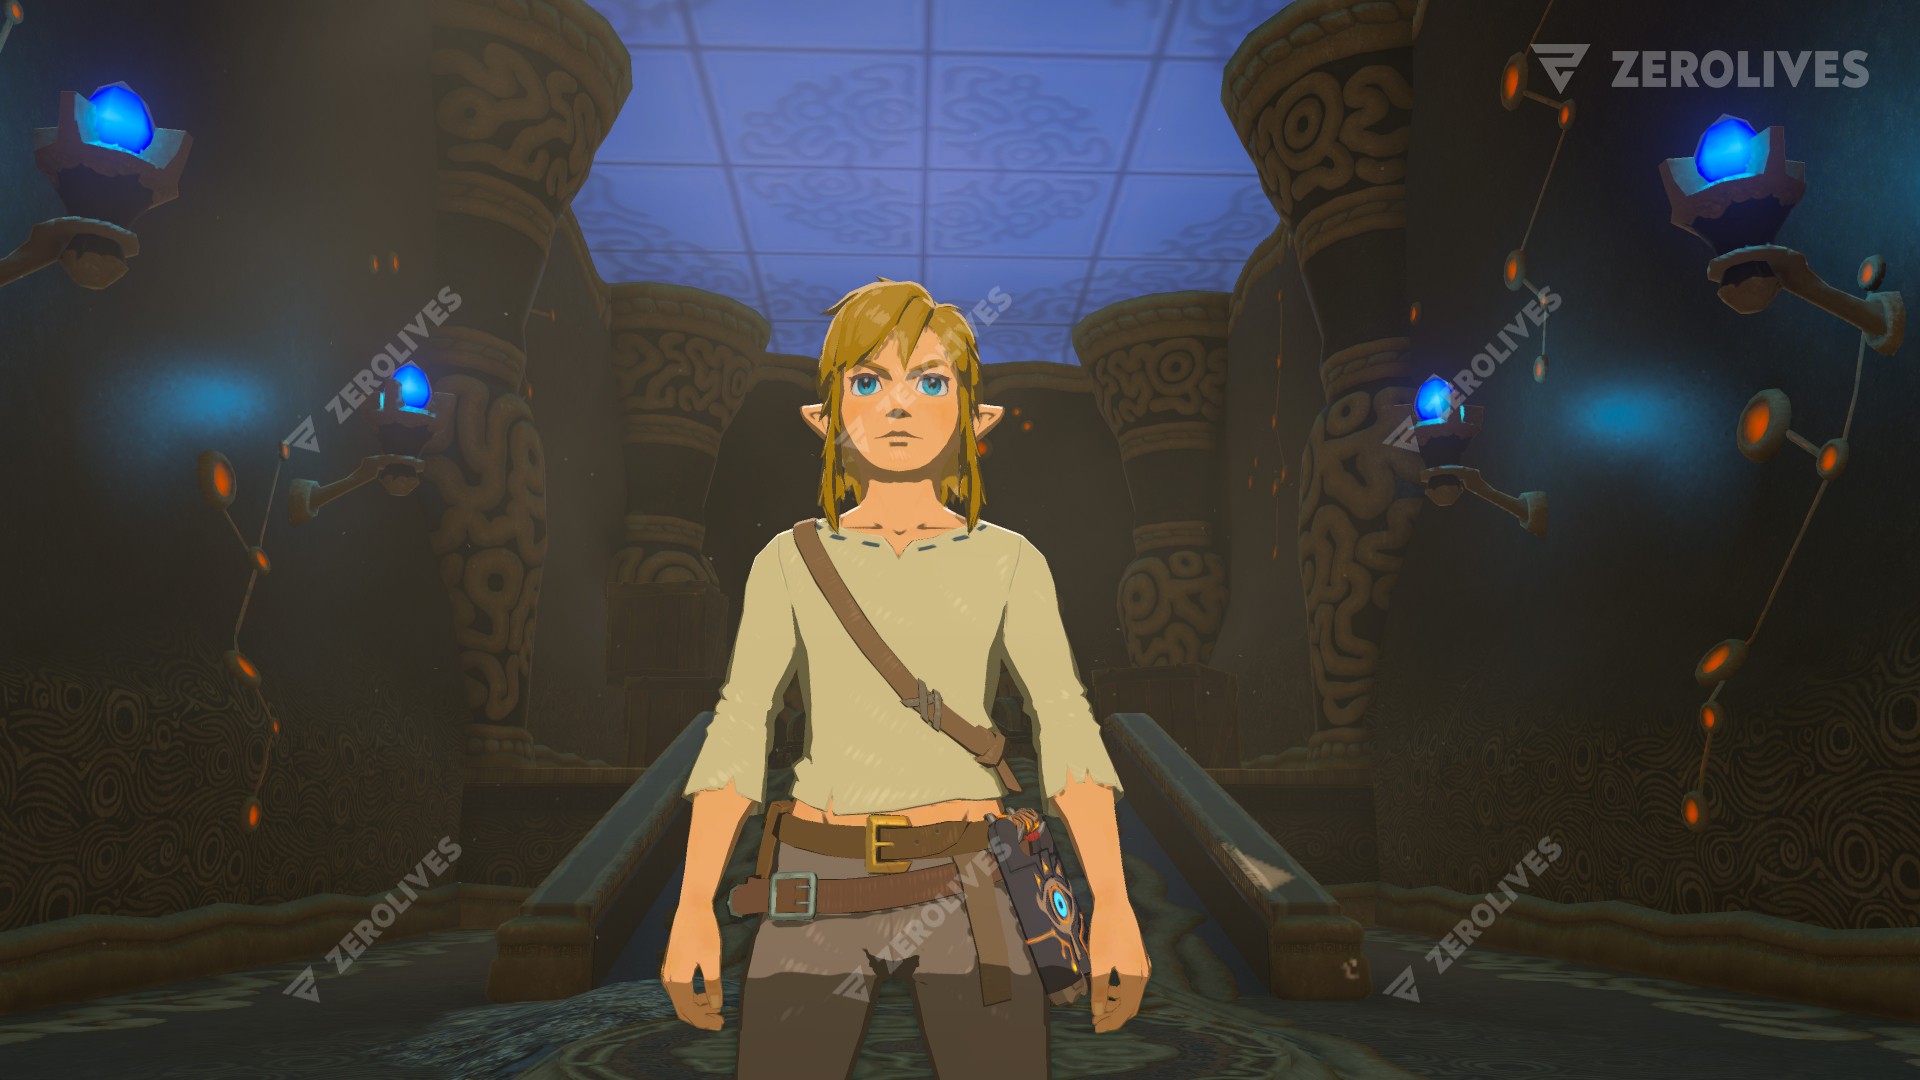 how to emulate breath of the wild on pc 2017